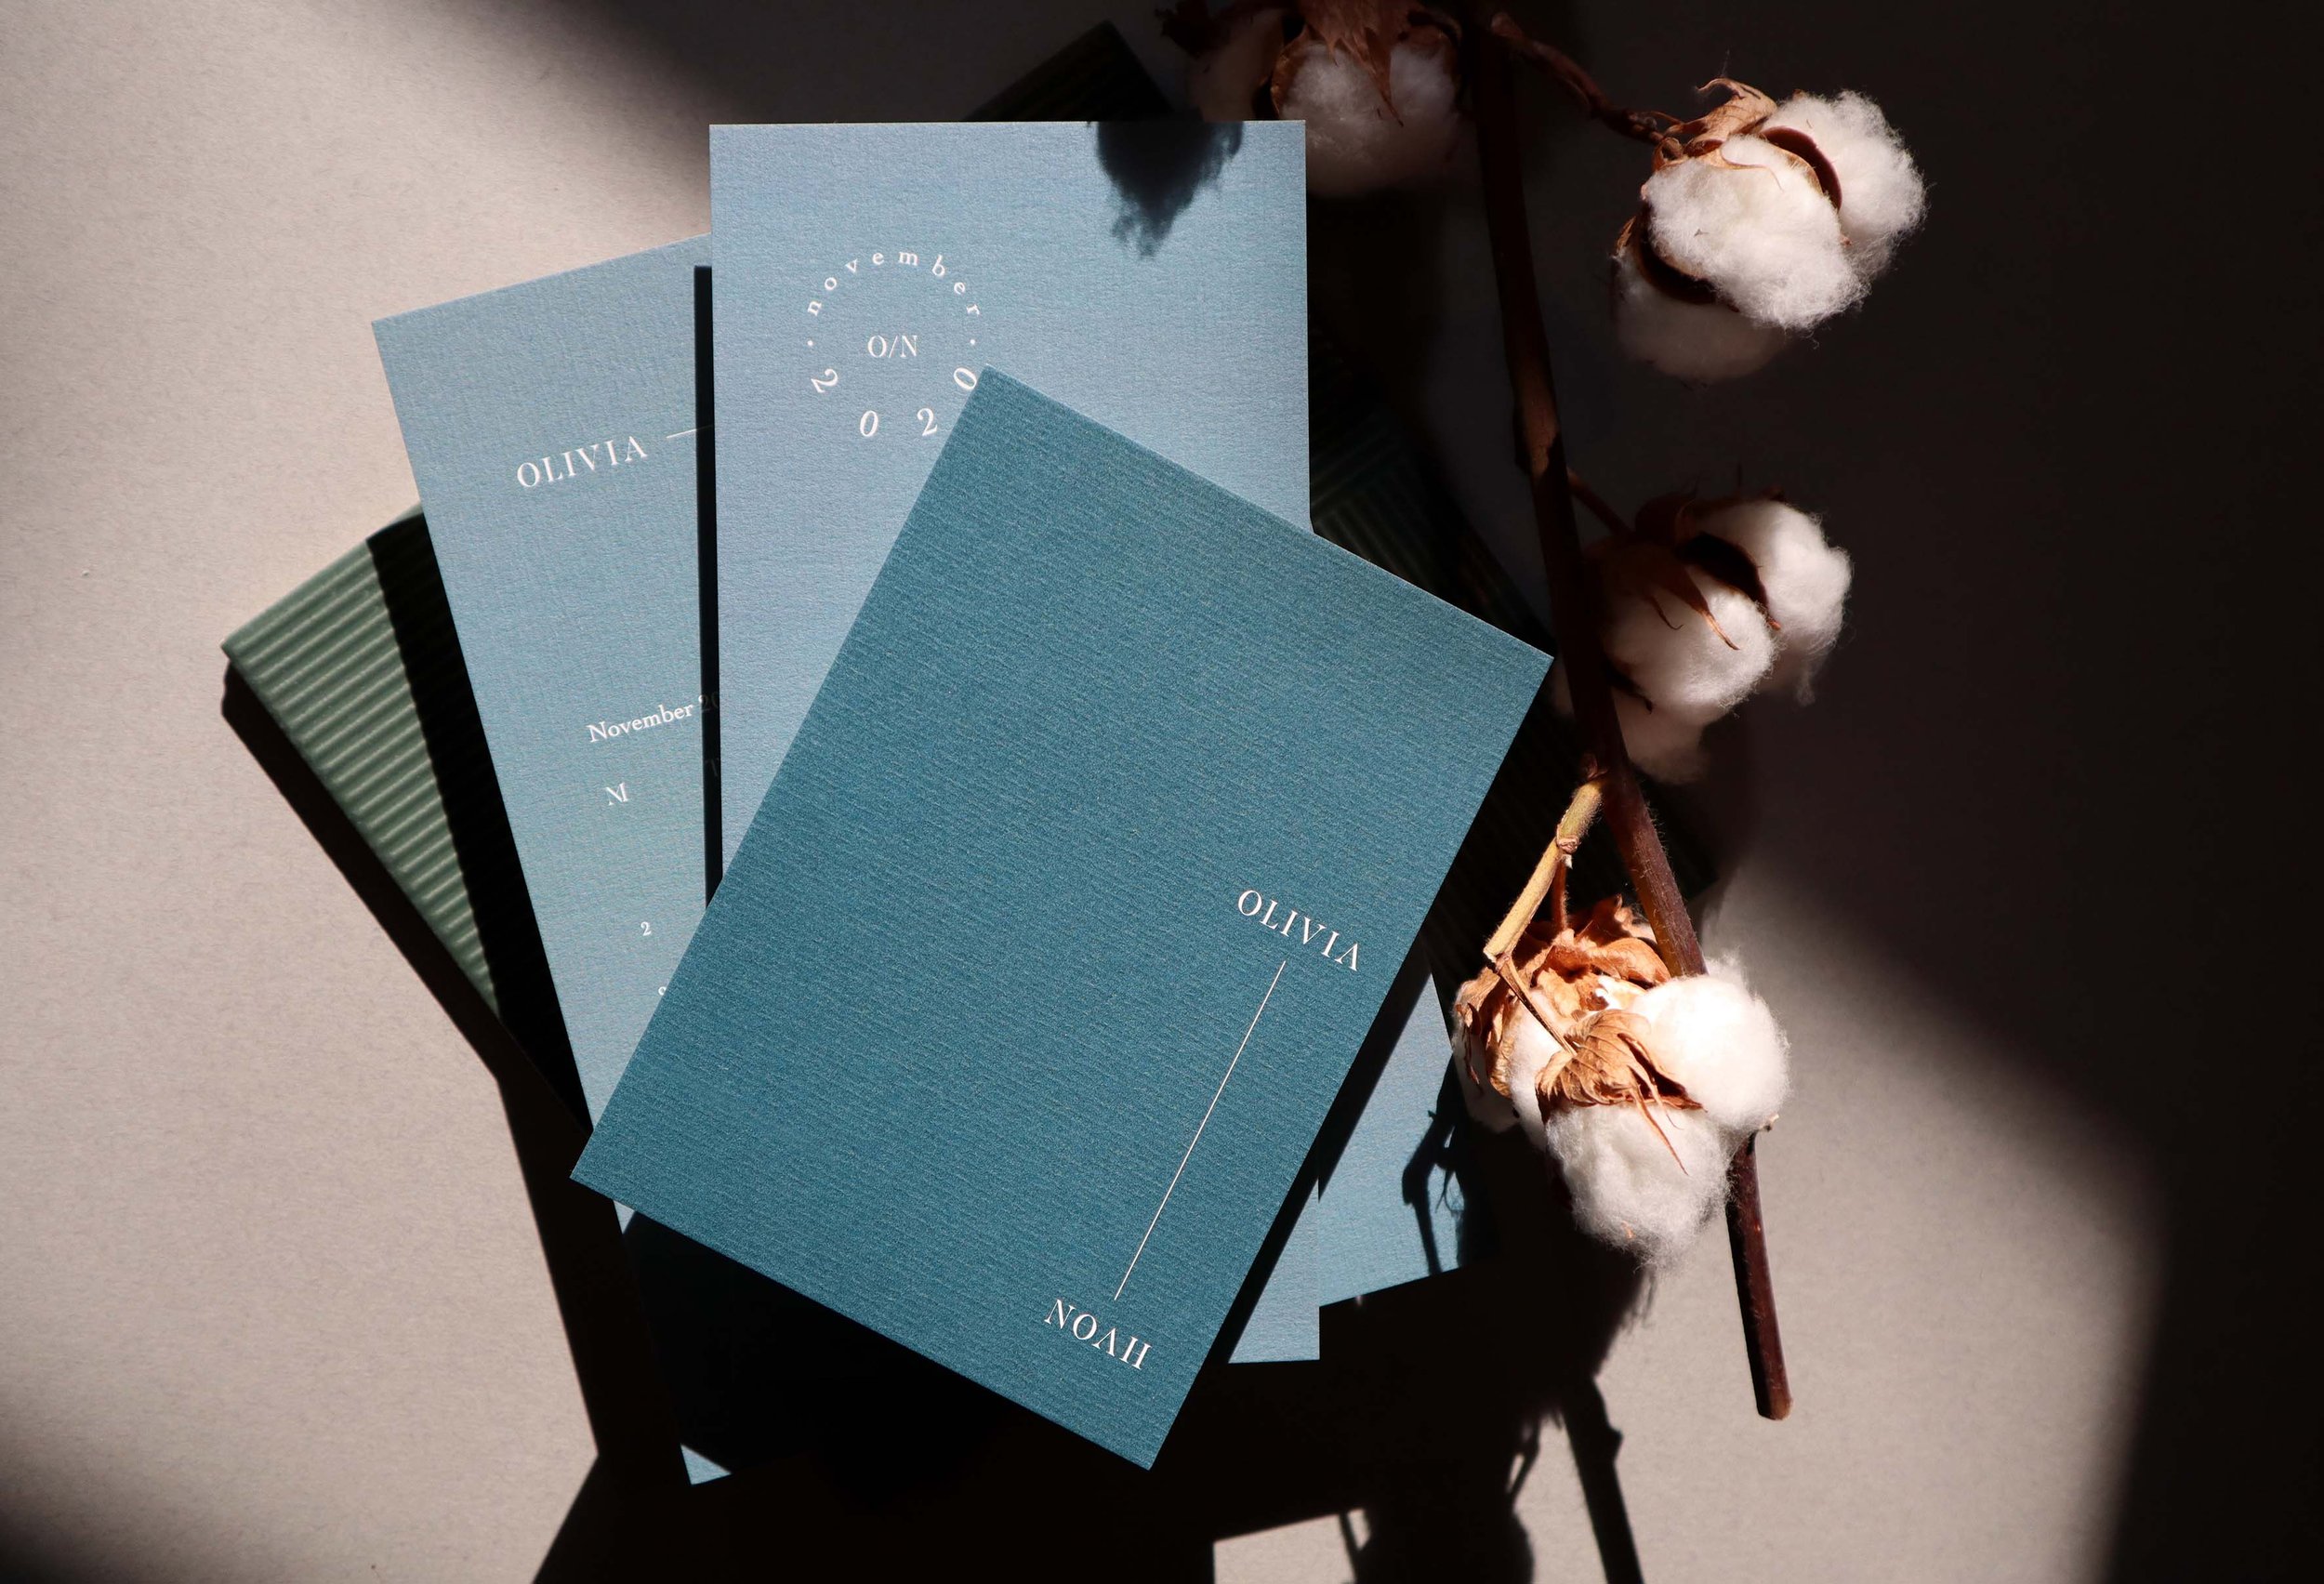  An artistic shot of some duck egg blue weddding stationery next to some cotton plants. 